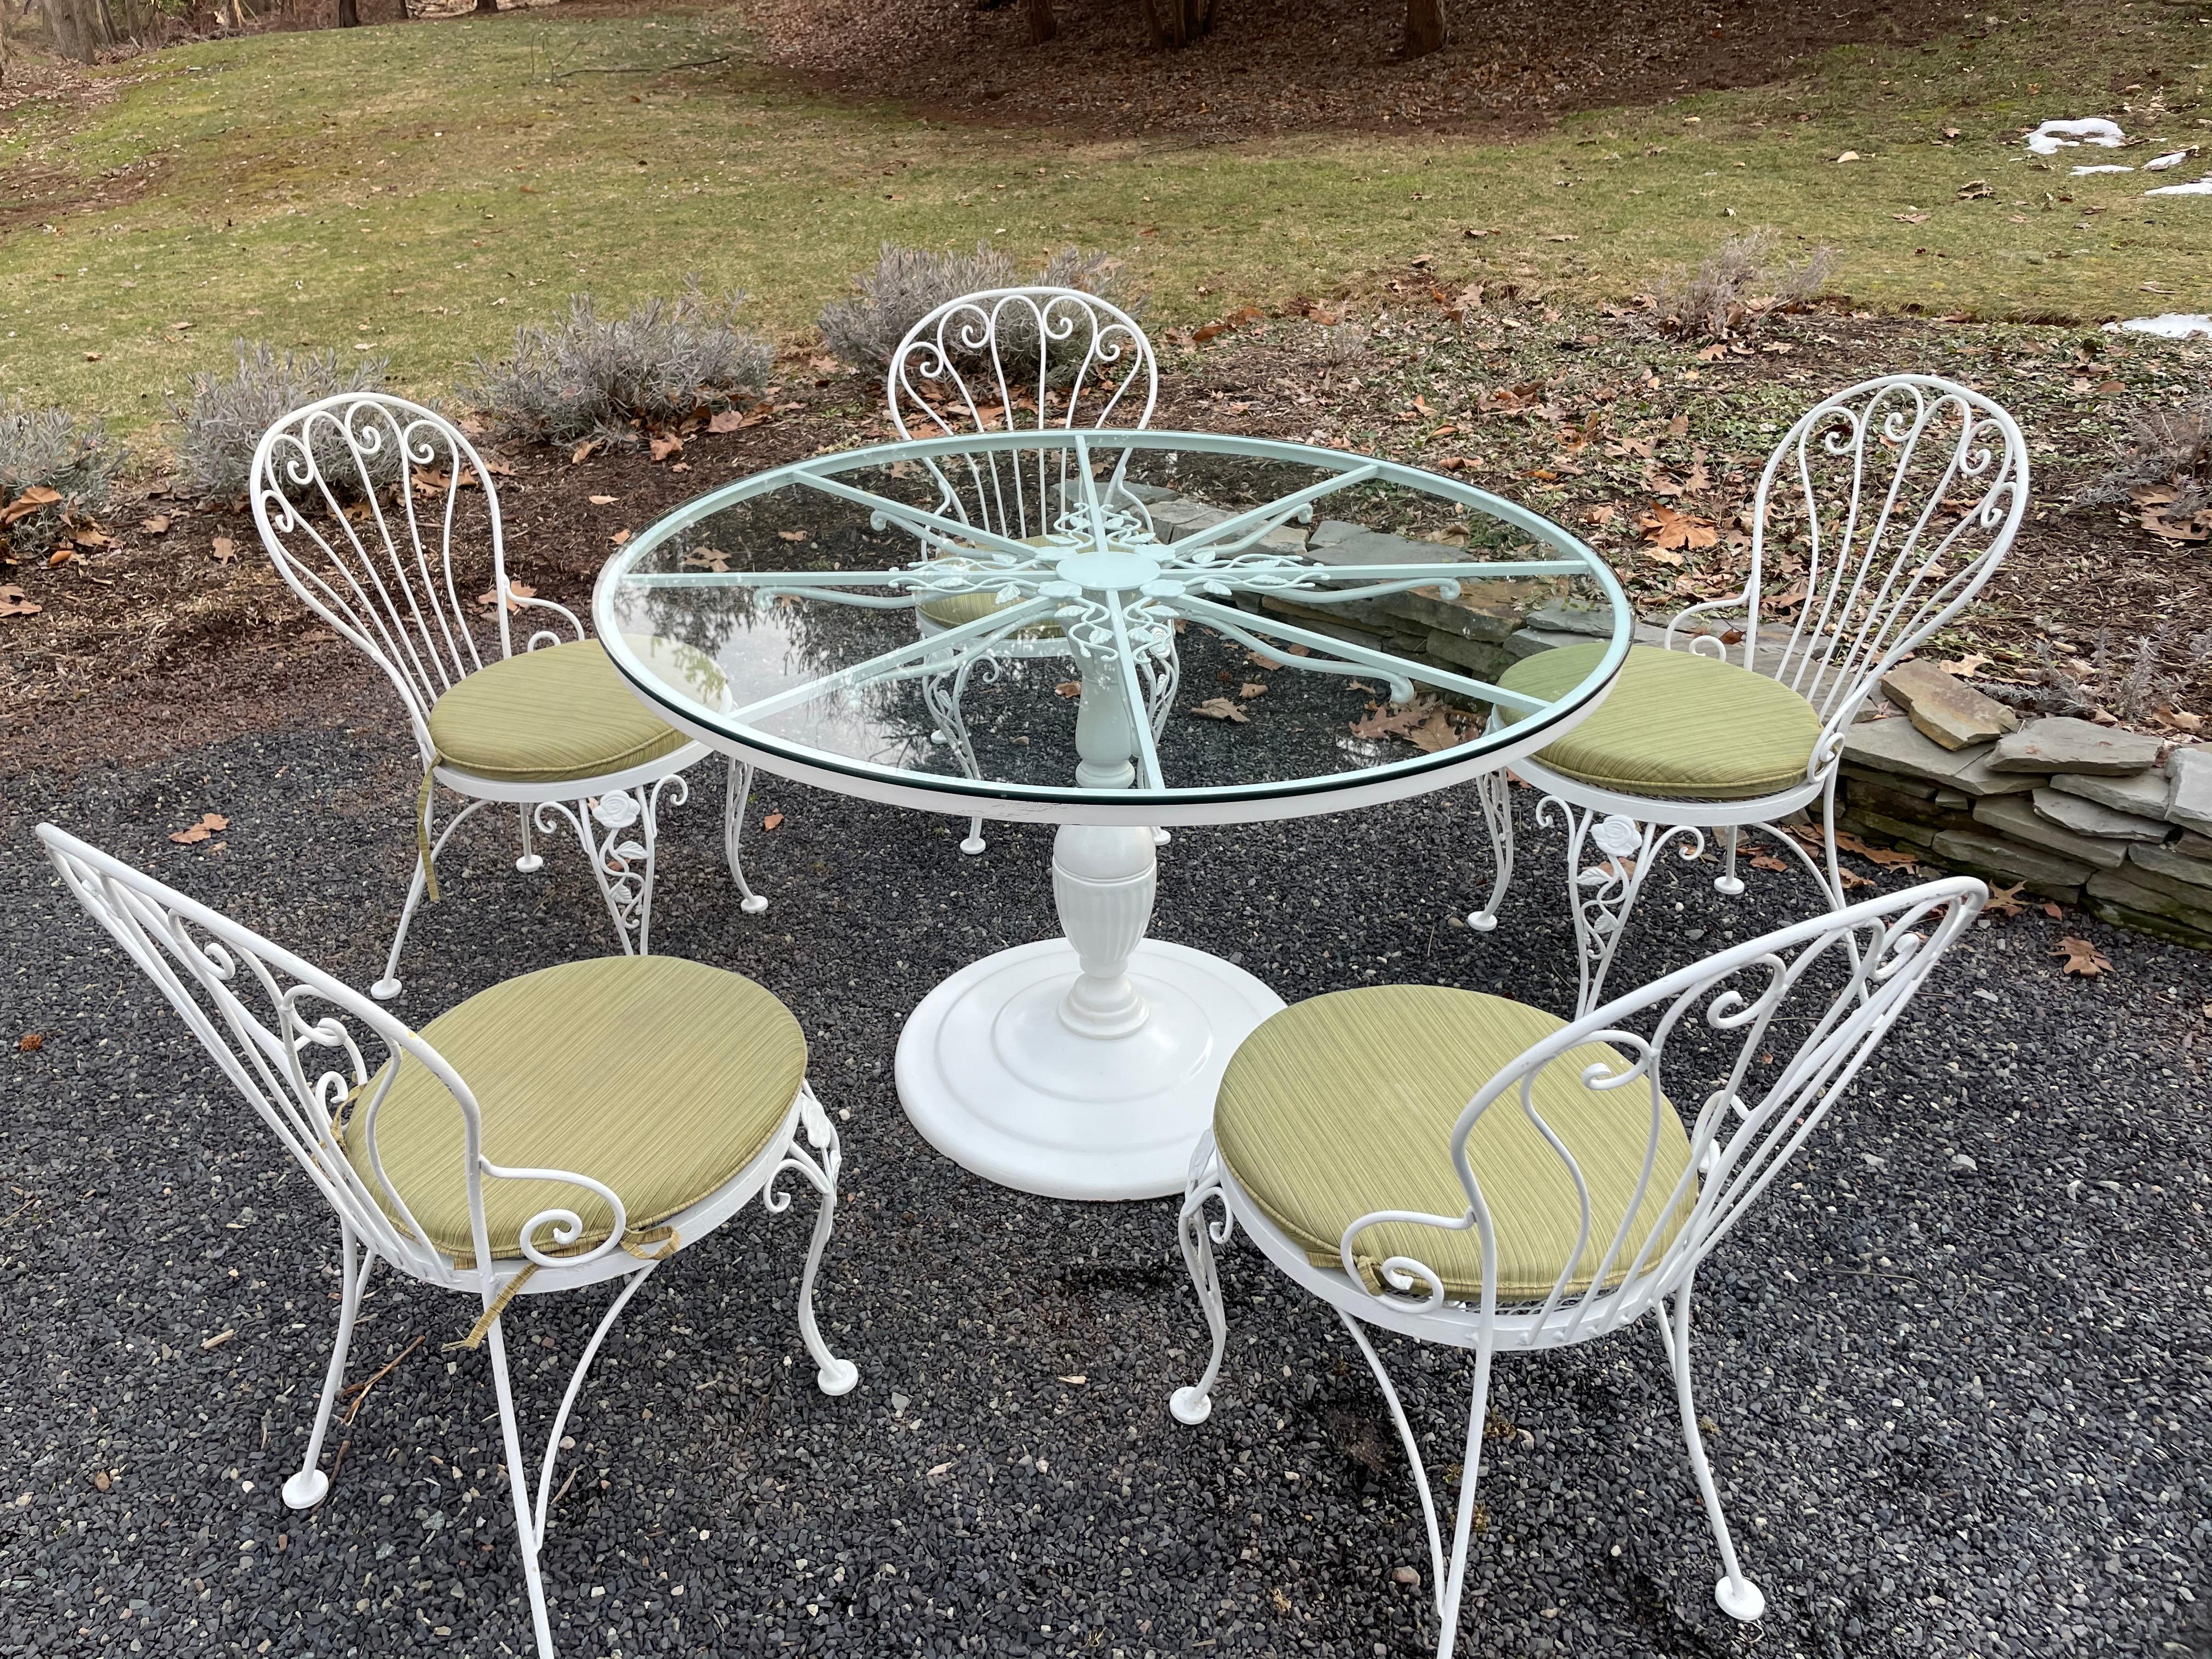 Classic patio dining table and chairs by Woodard having round table with center pedestal and pretty flower and leaf motife. Table includes 3/8